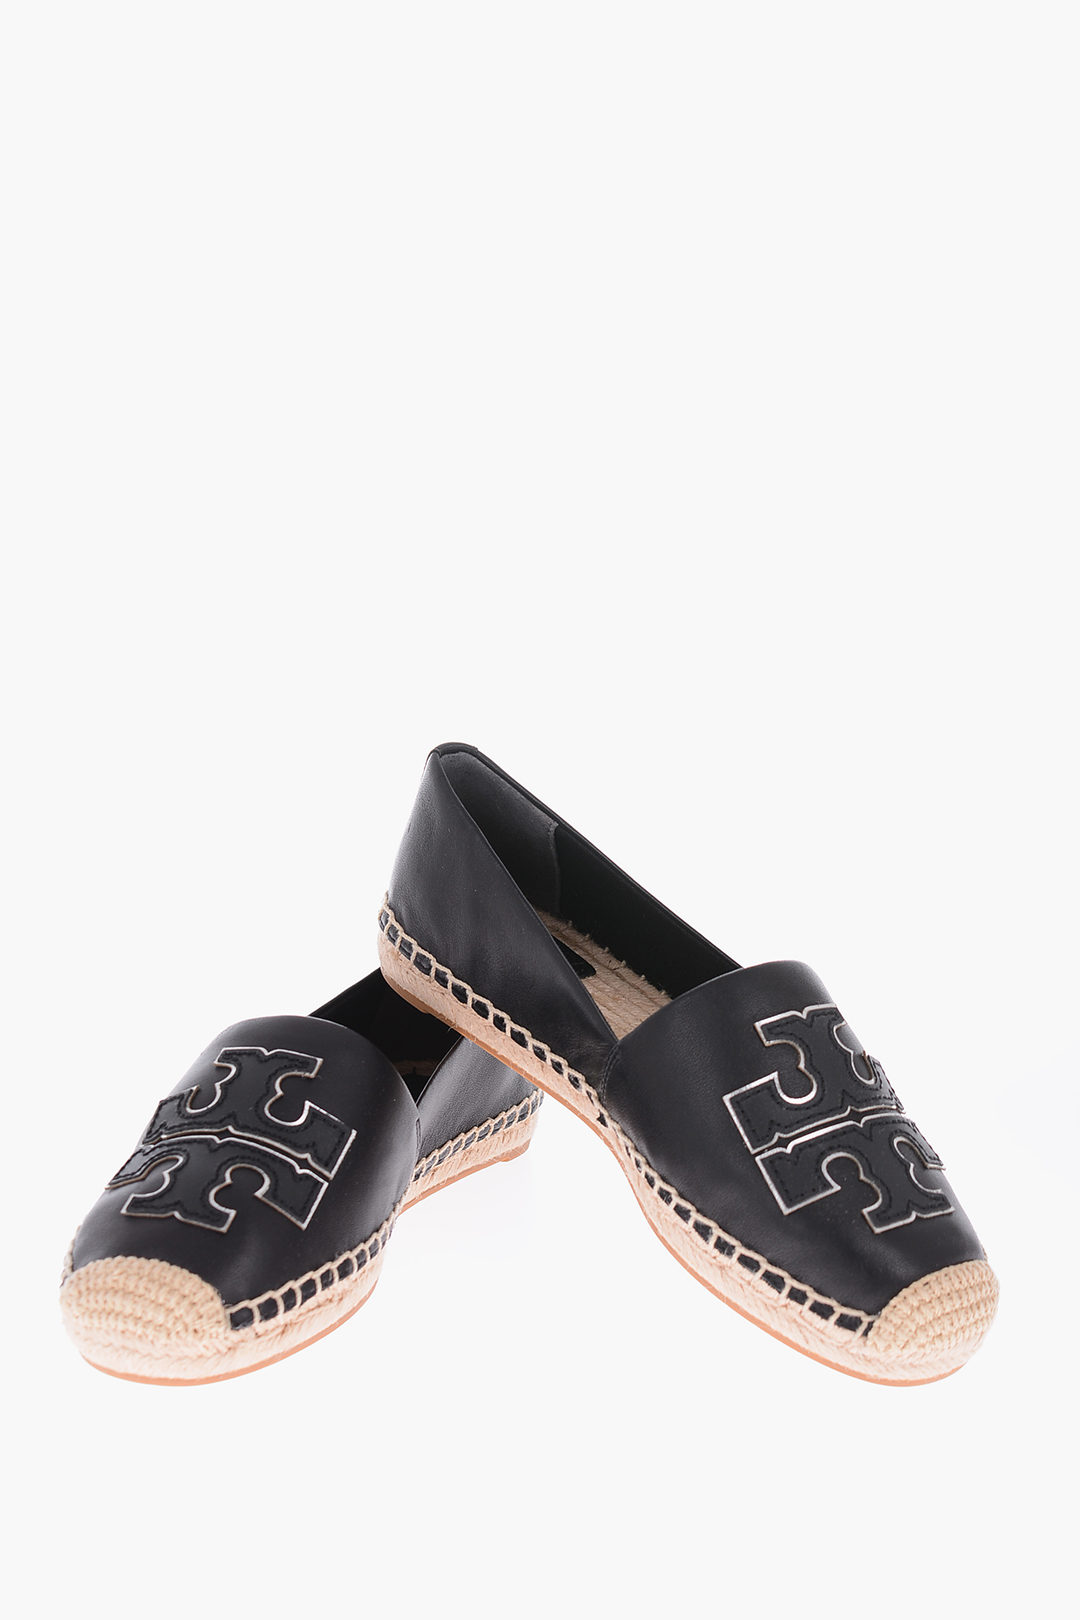 Tory Burch leather INES Espadrilles women - Glamood Outlet